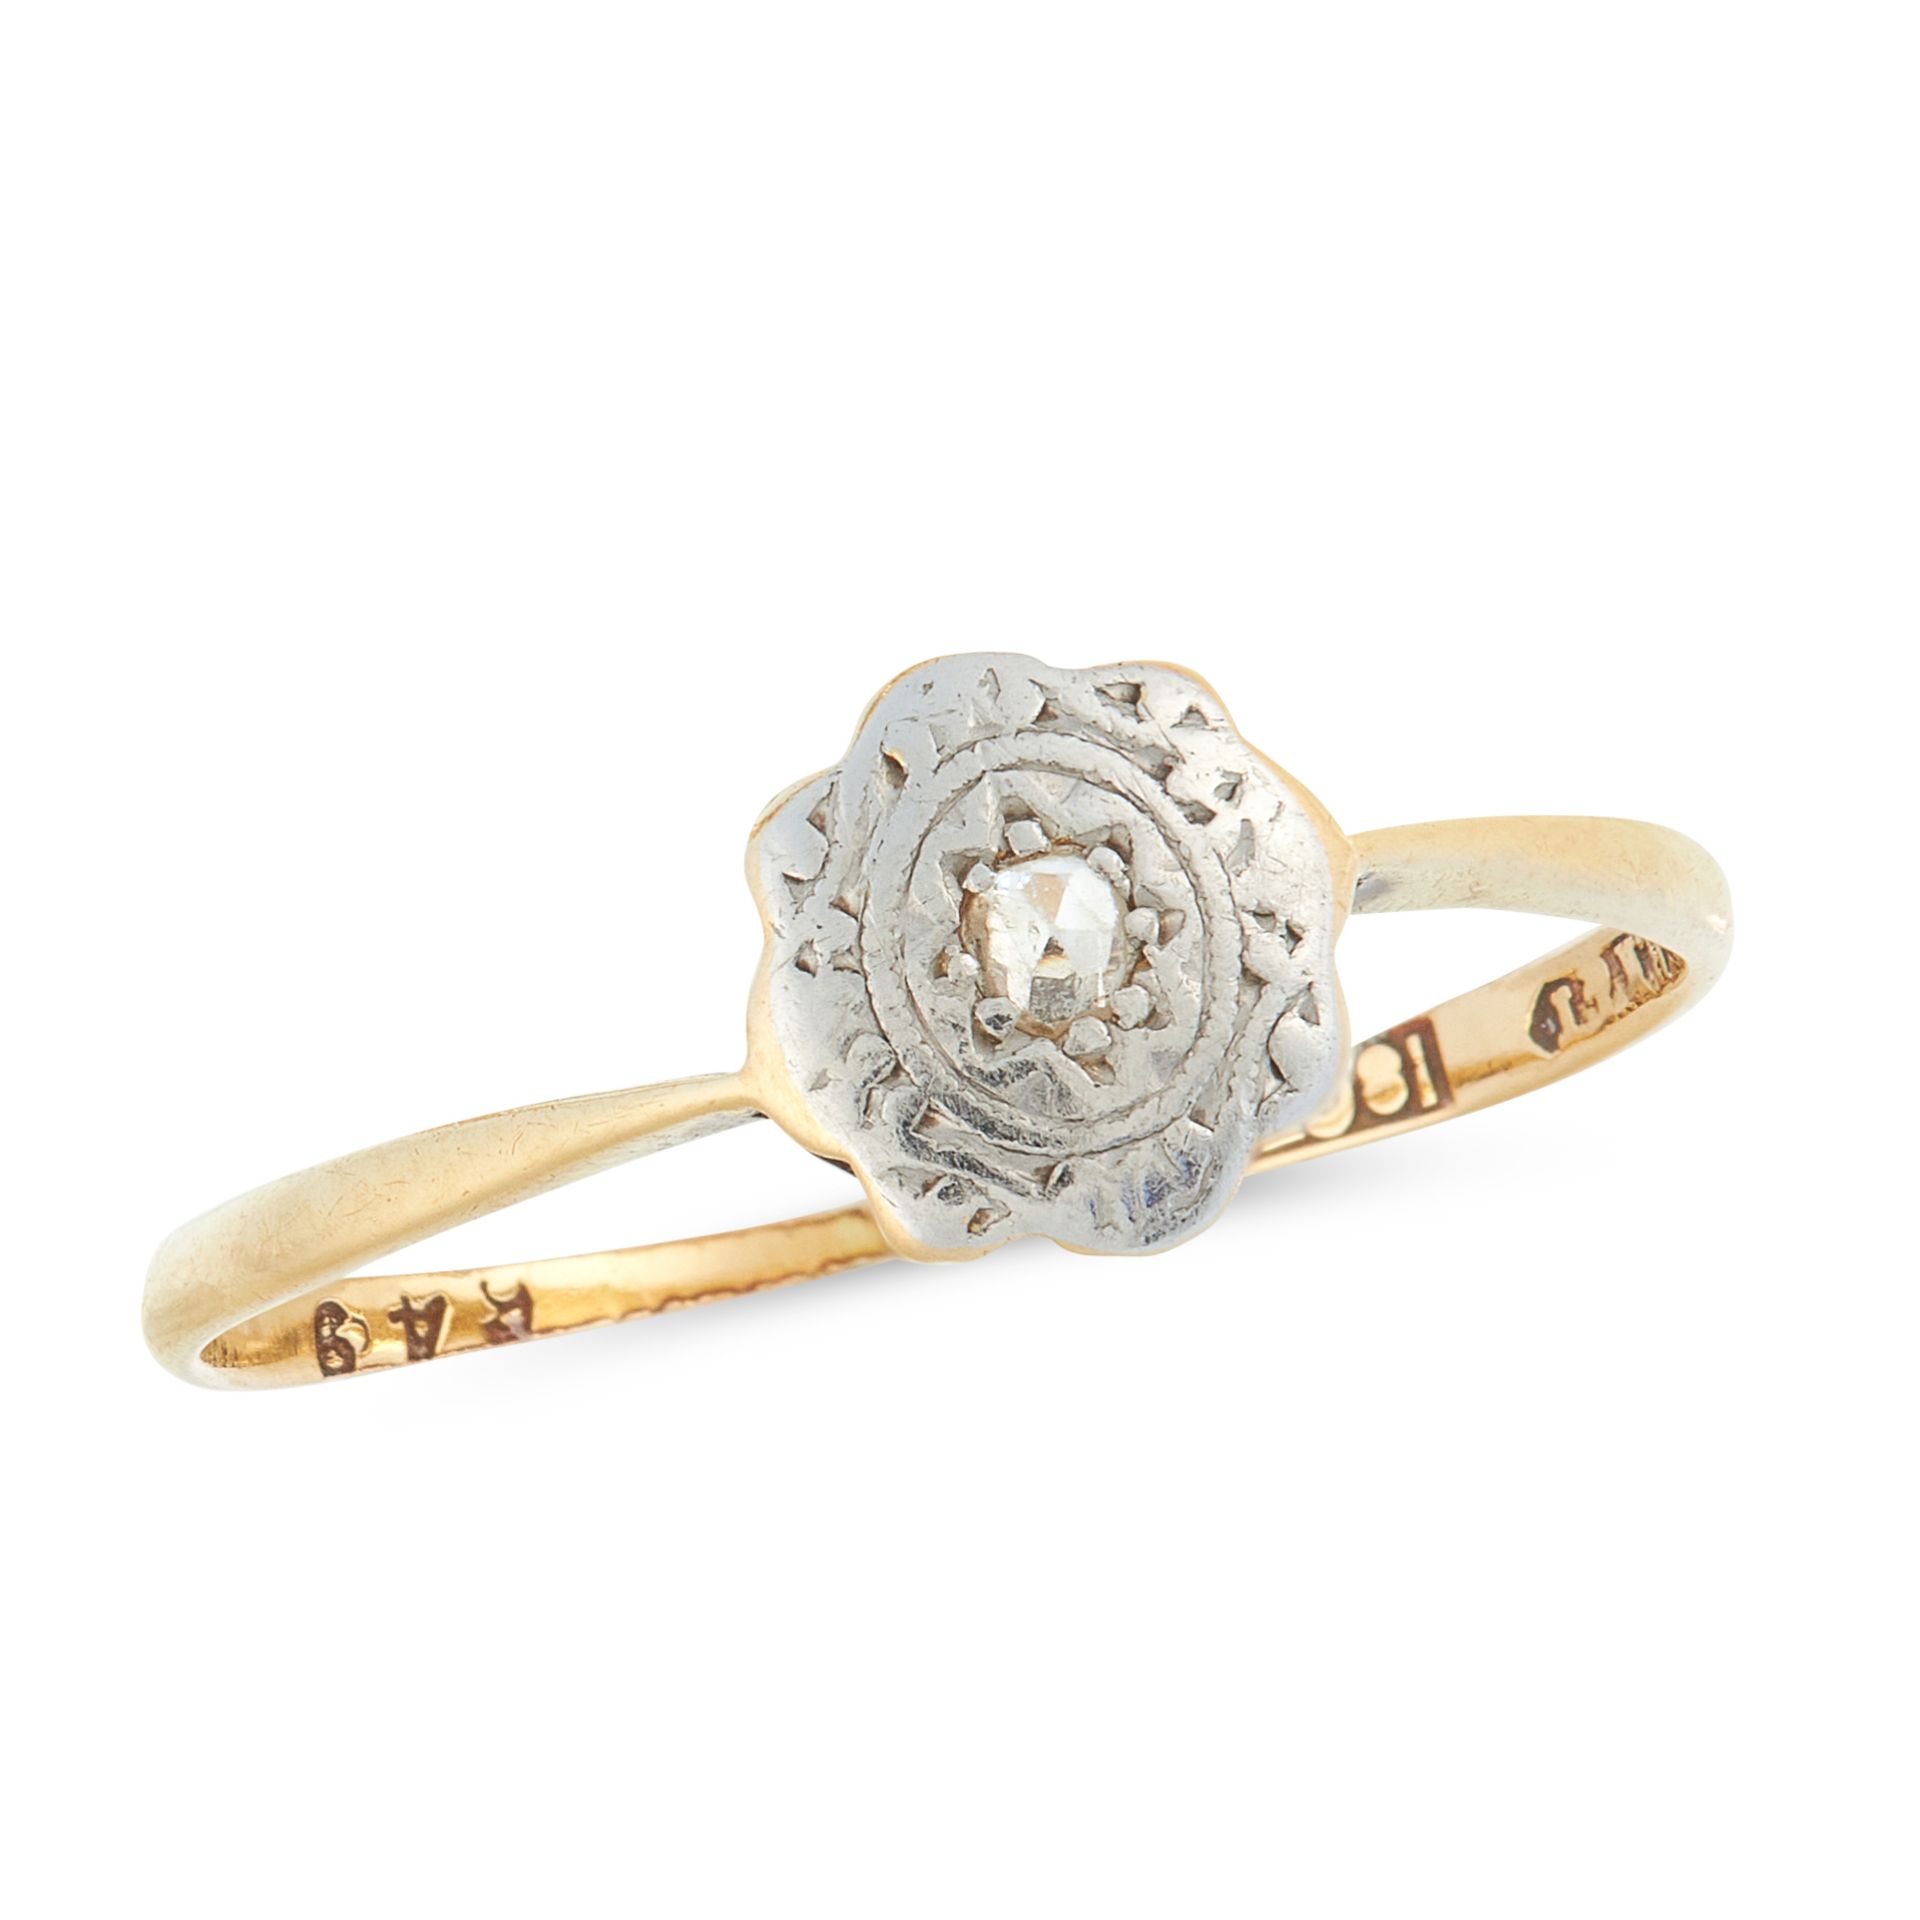 AN ANTIQUE DIAMOND RING in 18ct yellow gold and platinum, set with a rose cut diamond in engraved